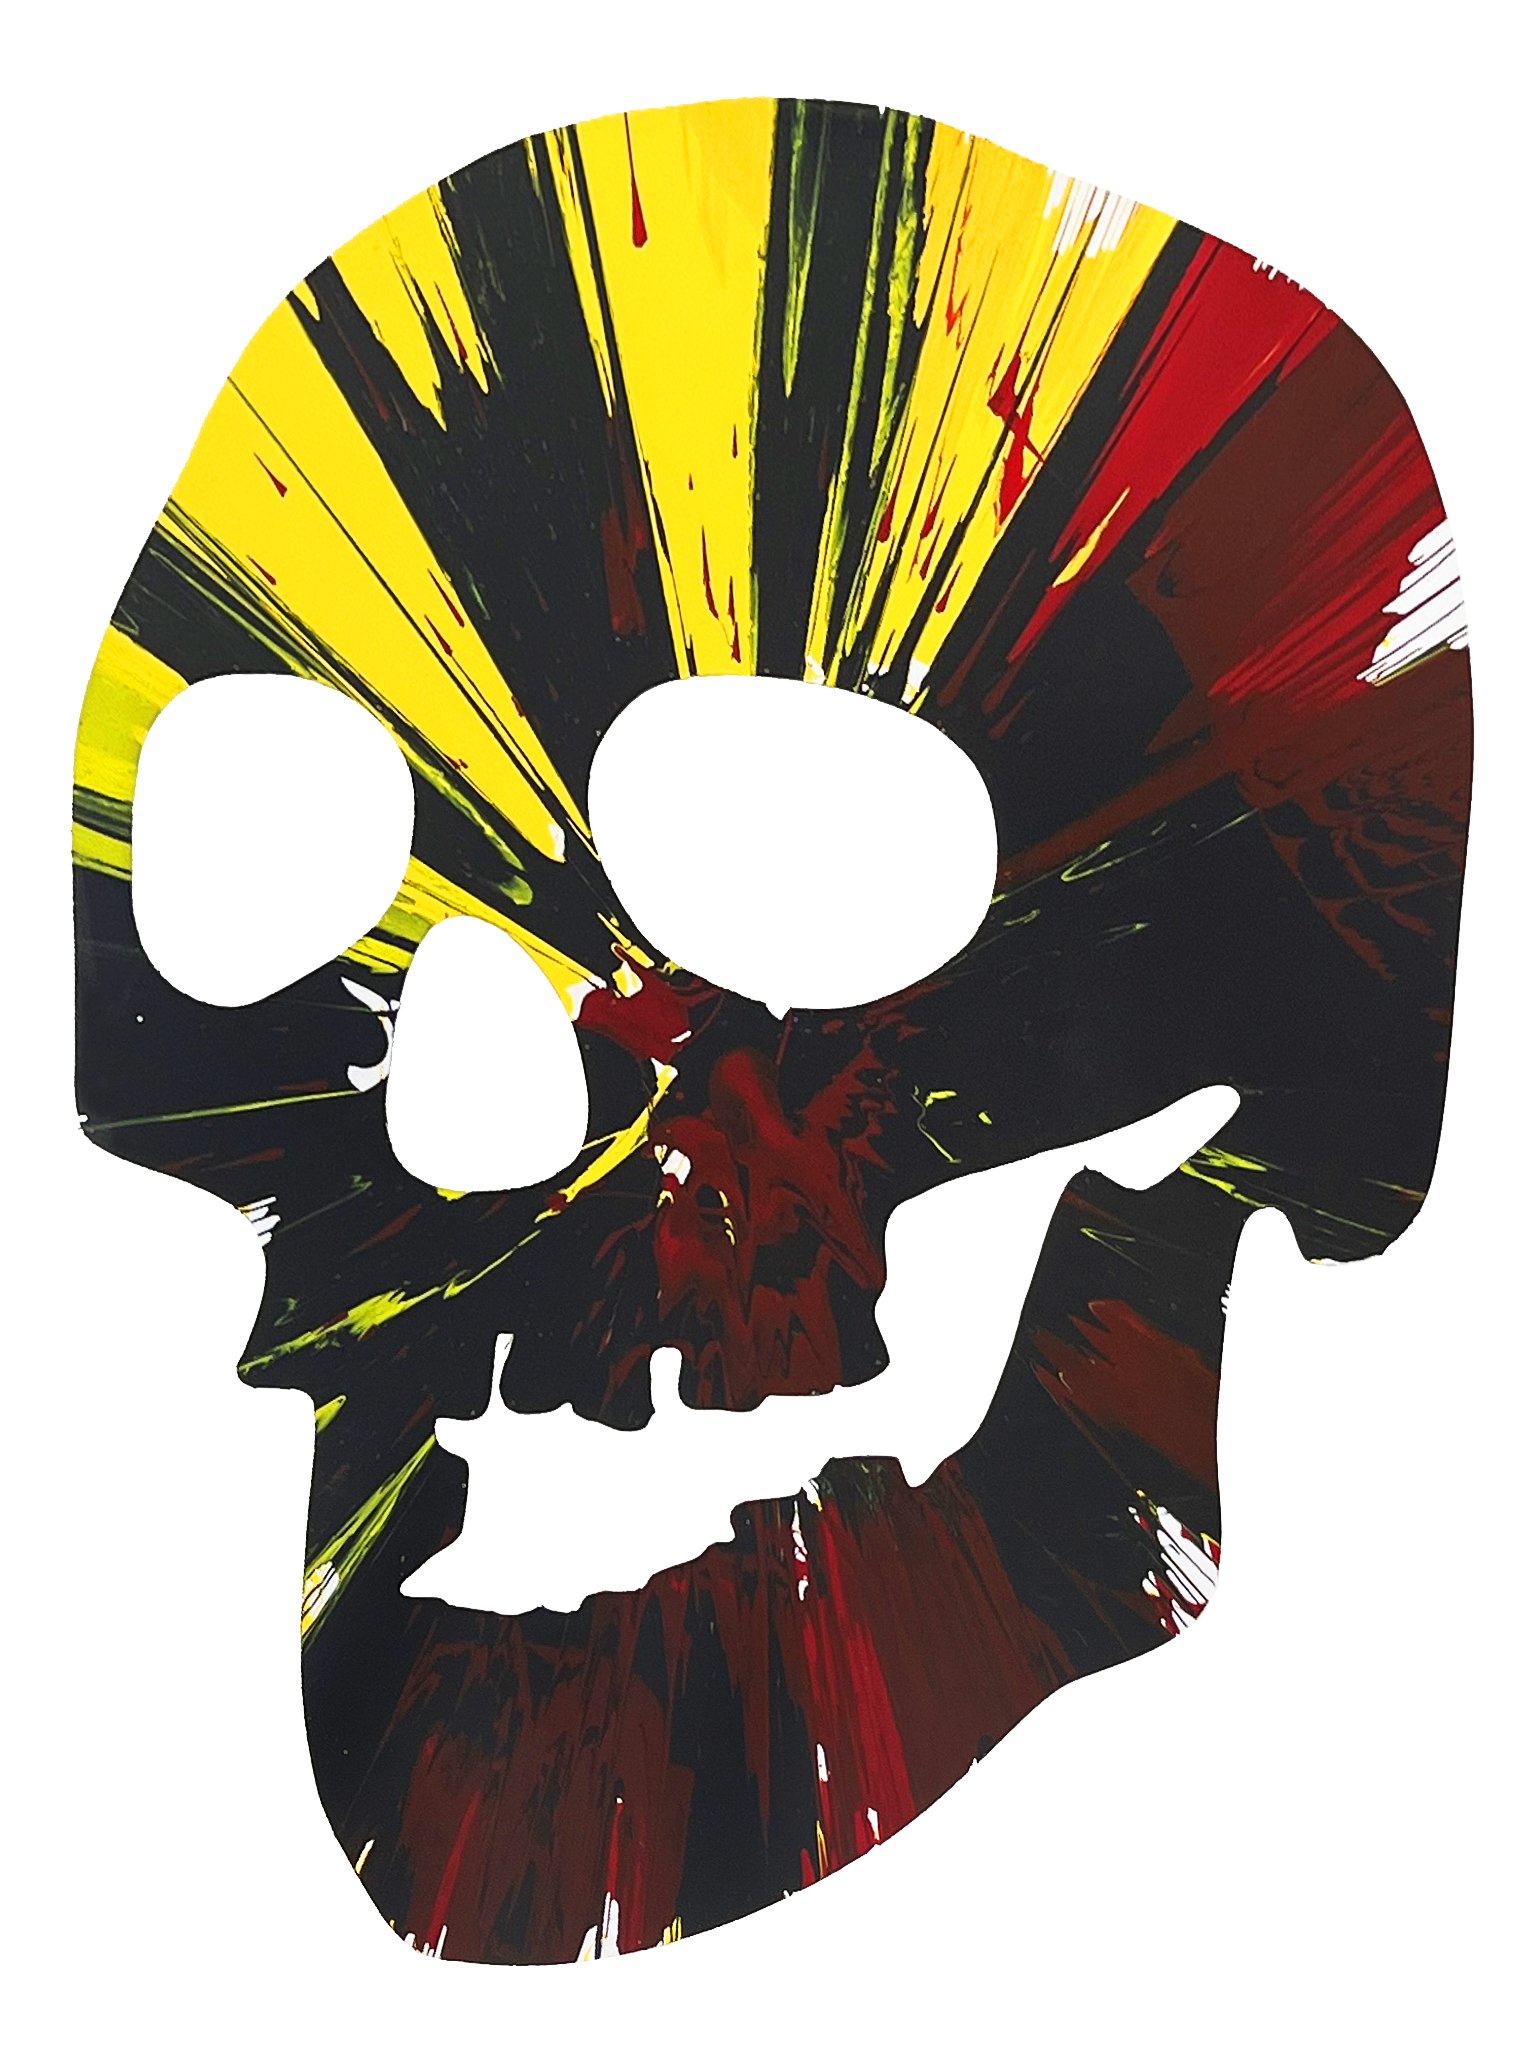 Untitled (Skull Spin painting) | Damien Hirst